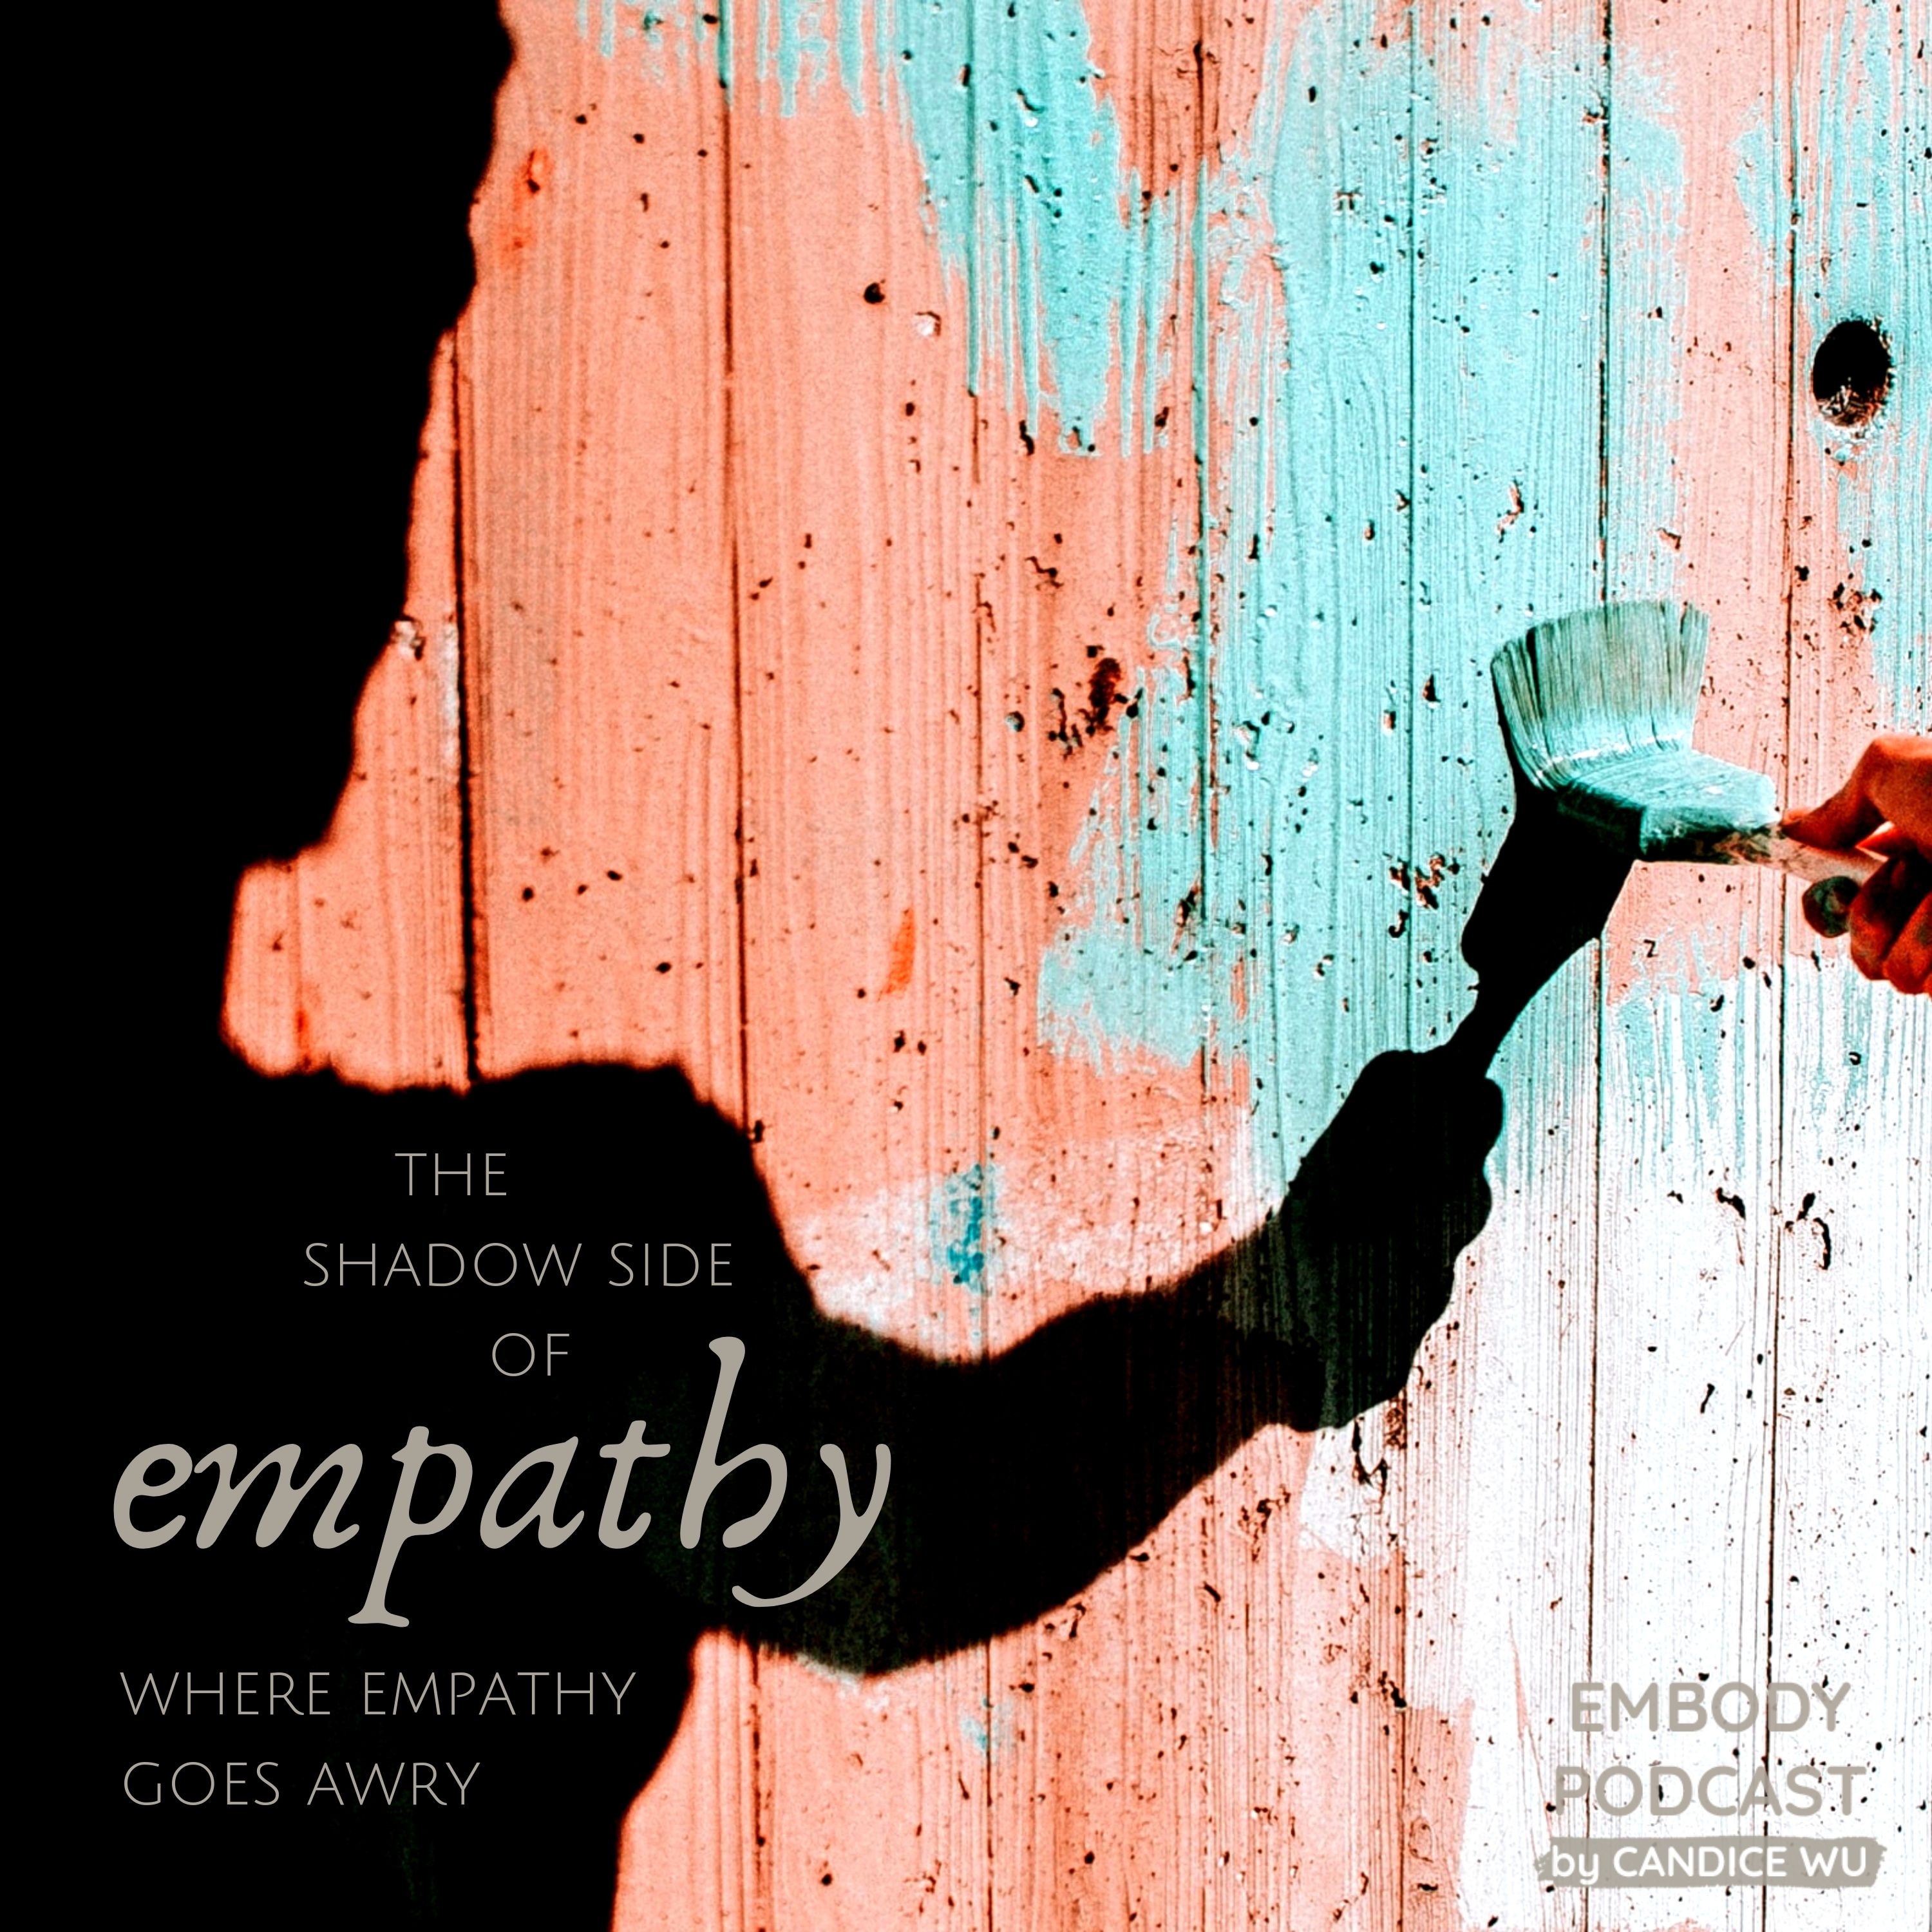 86: The Shadow Side of Empathy: When Empathy Goes Awry